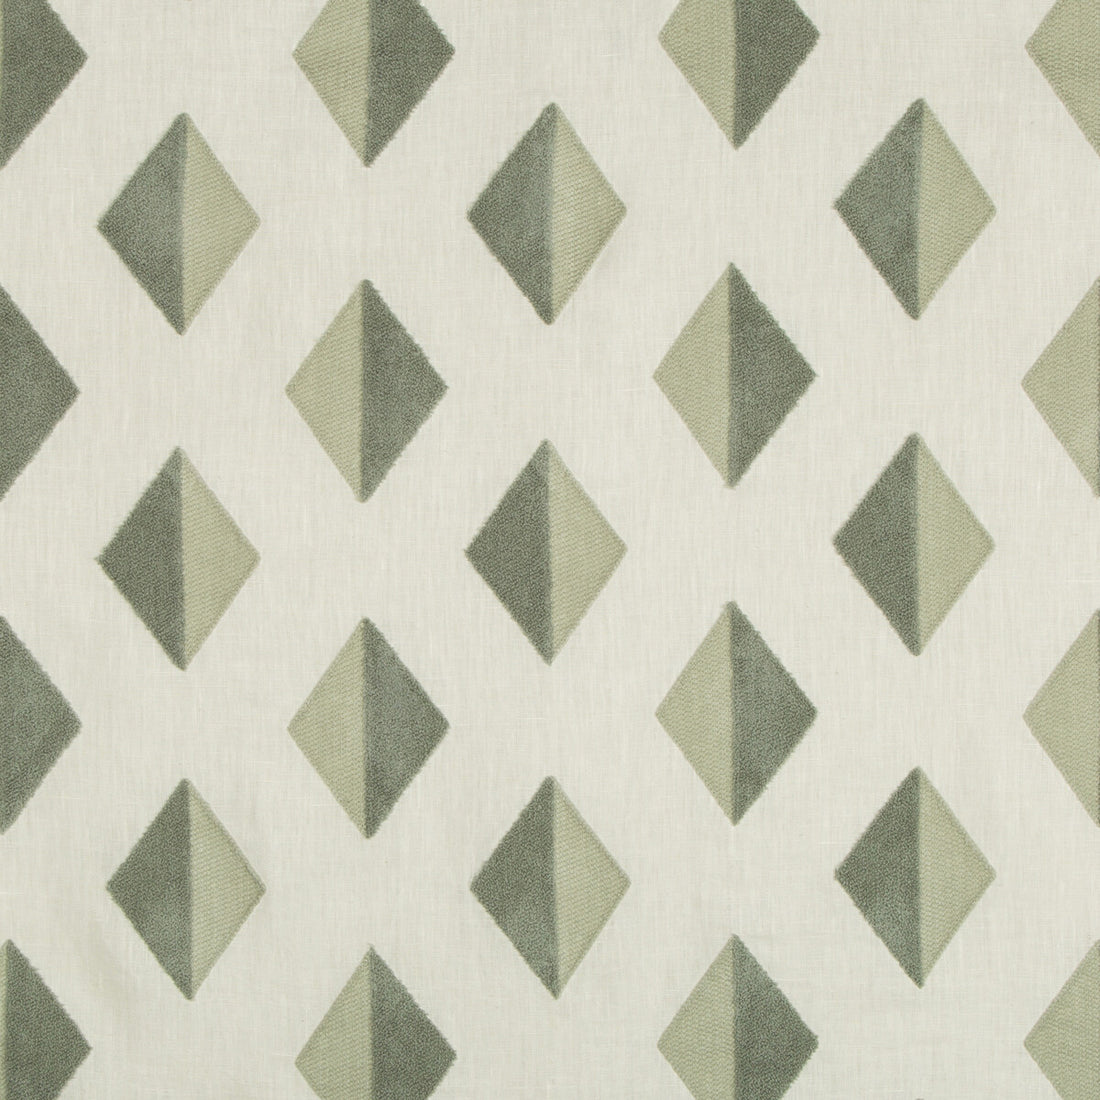 Barroco Boucle fabric in seafoam color - pattern 35389.13.0 - by Kravet Design in the Nate Berkus Well-Traveled collection